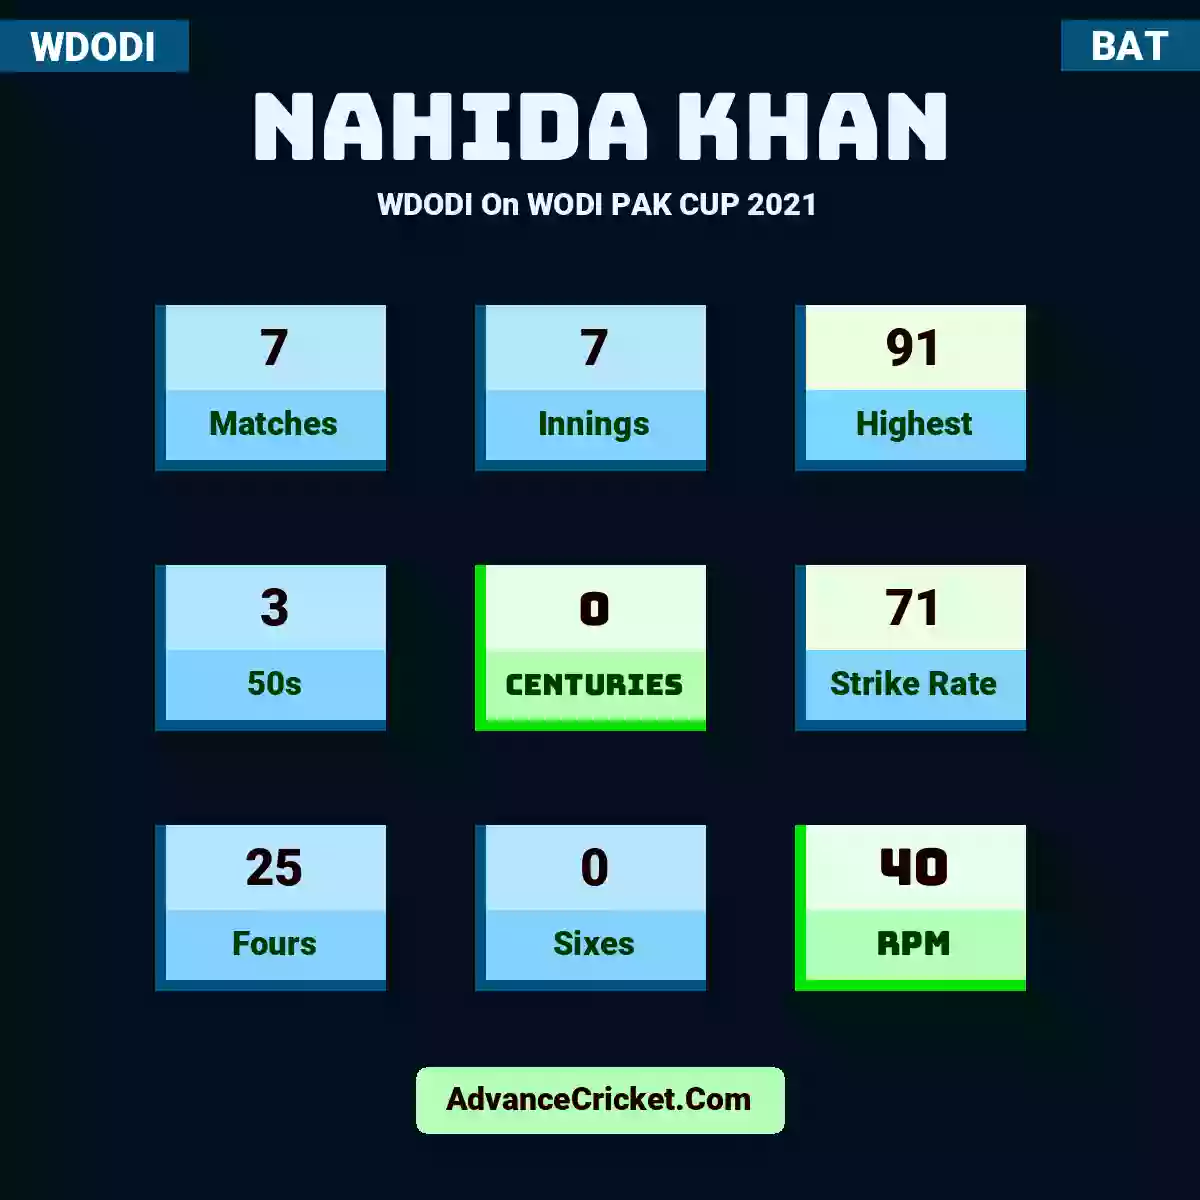 Nahida Khan WDODI  On WODI PAK CUP 2021, Nahida Khan played 7 matches, scored 91 runs as highest, 3 half-centuries, and 0 centuries, with a strike rate of 71. N.Khan hit 25 fours and 0 sixes, with an RPM of 40.